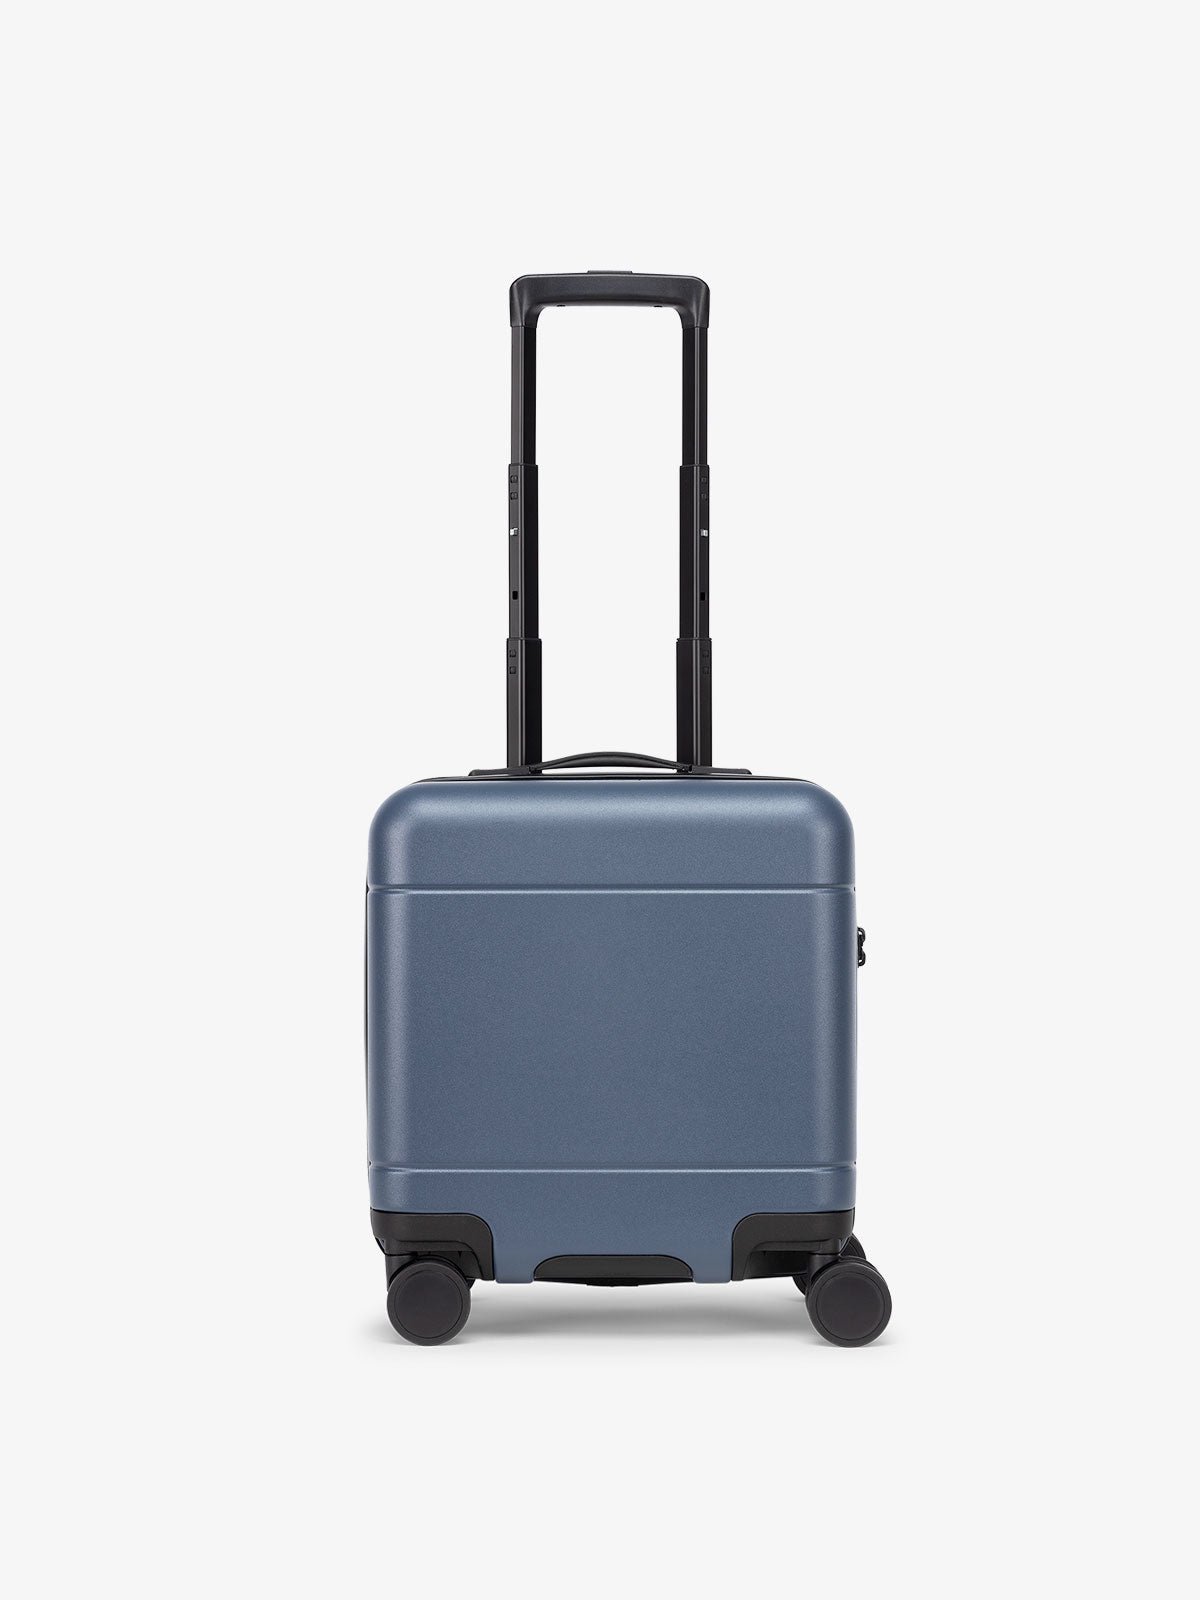 Hue mini carry on luggage in atlantic blue